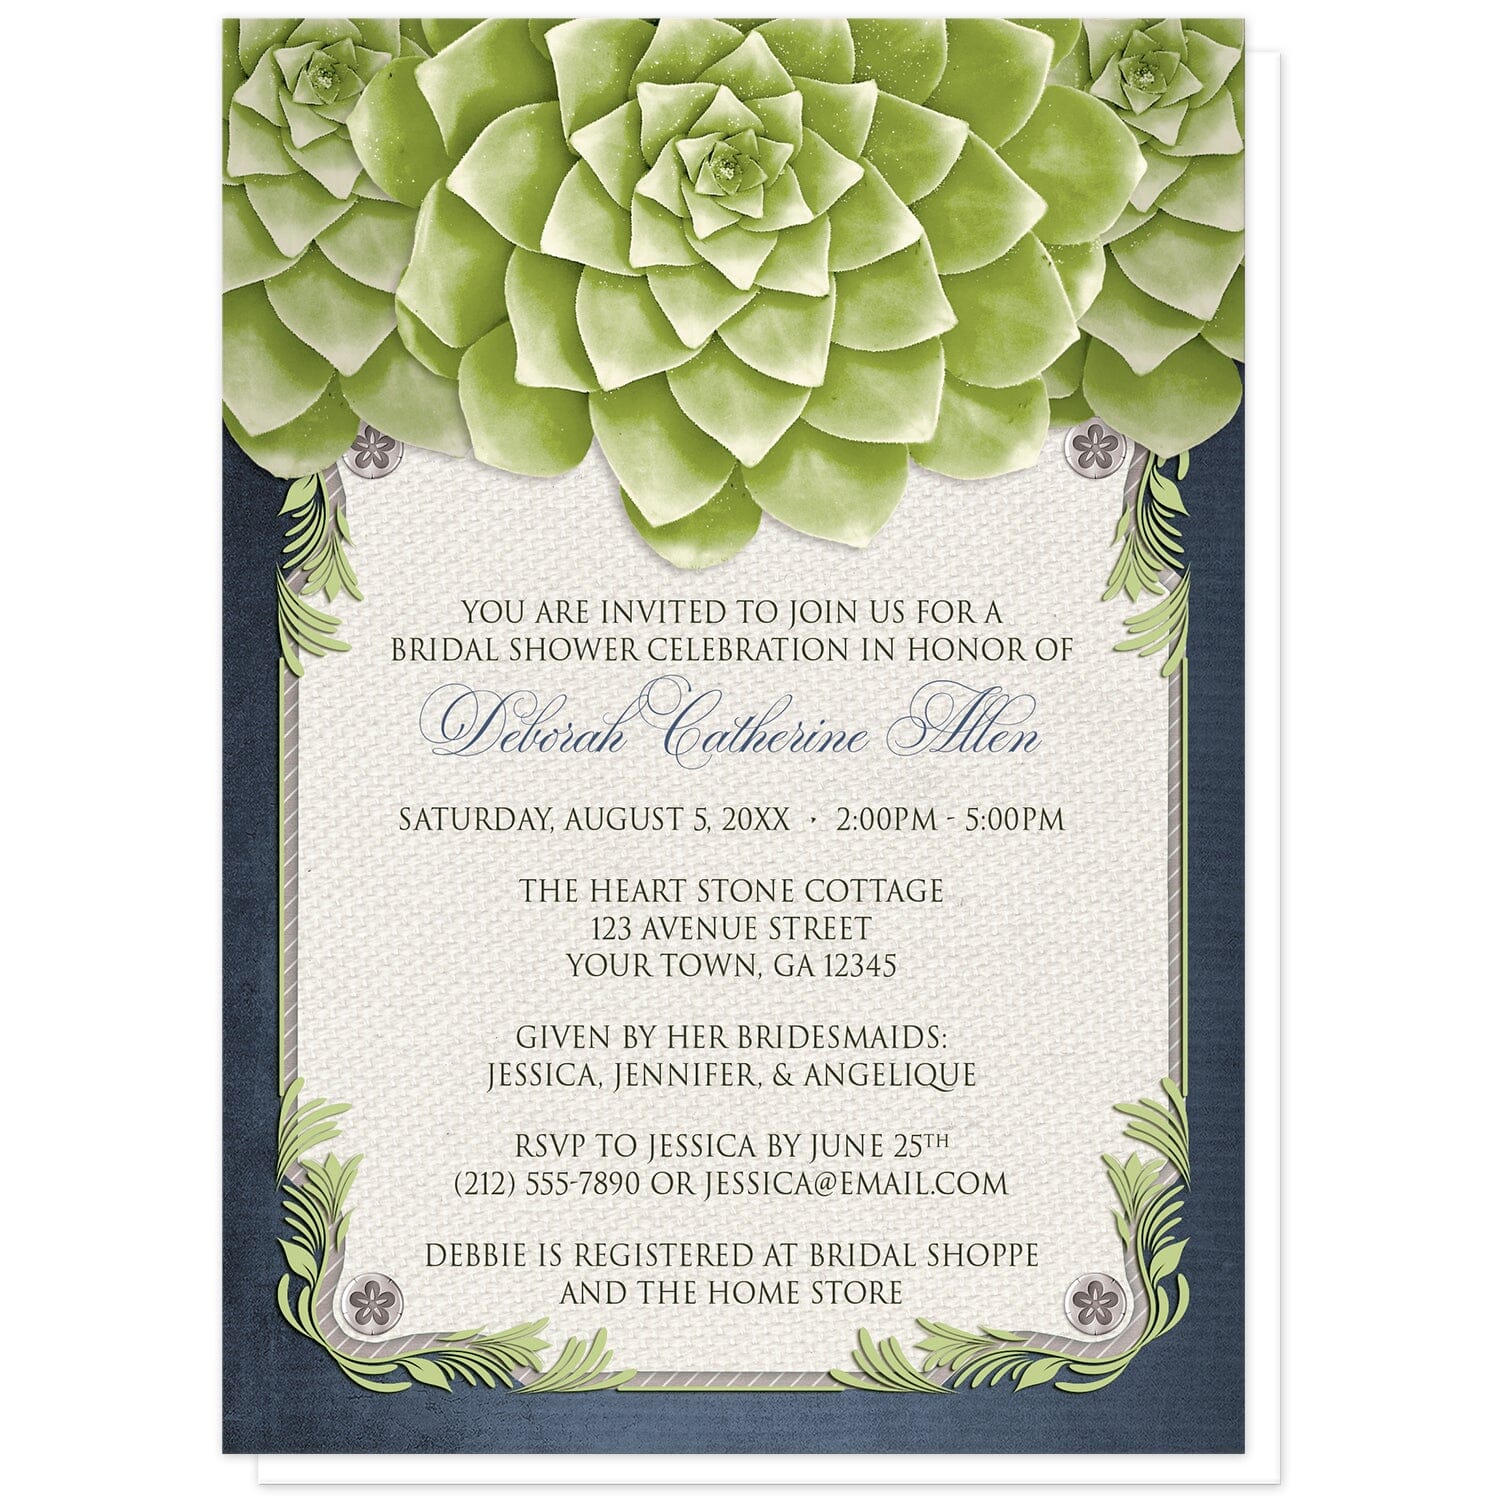 Rustic Succulent Garden Navy Bridal Shower Invitations at Artistically Invited. Rustic succulent garden navy bridal shower invitations with three large and lovely green succulents along the top over a beige canvas texture illustration framed with a leafy green decorative border, striped gray, and four floral metal pin illustrations, all over a navy blue background along the edges. 